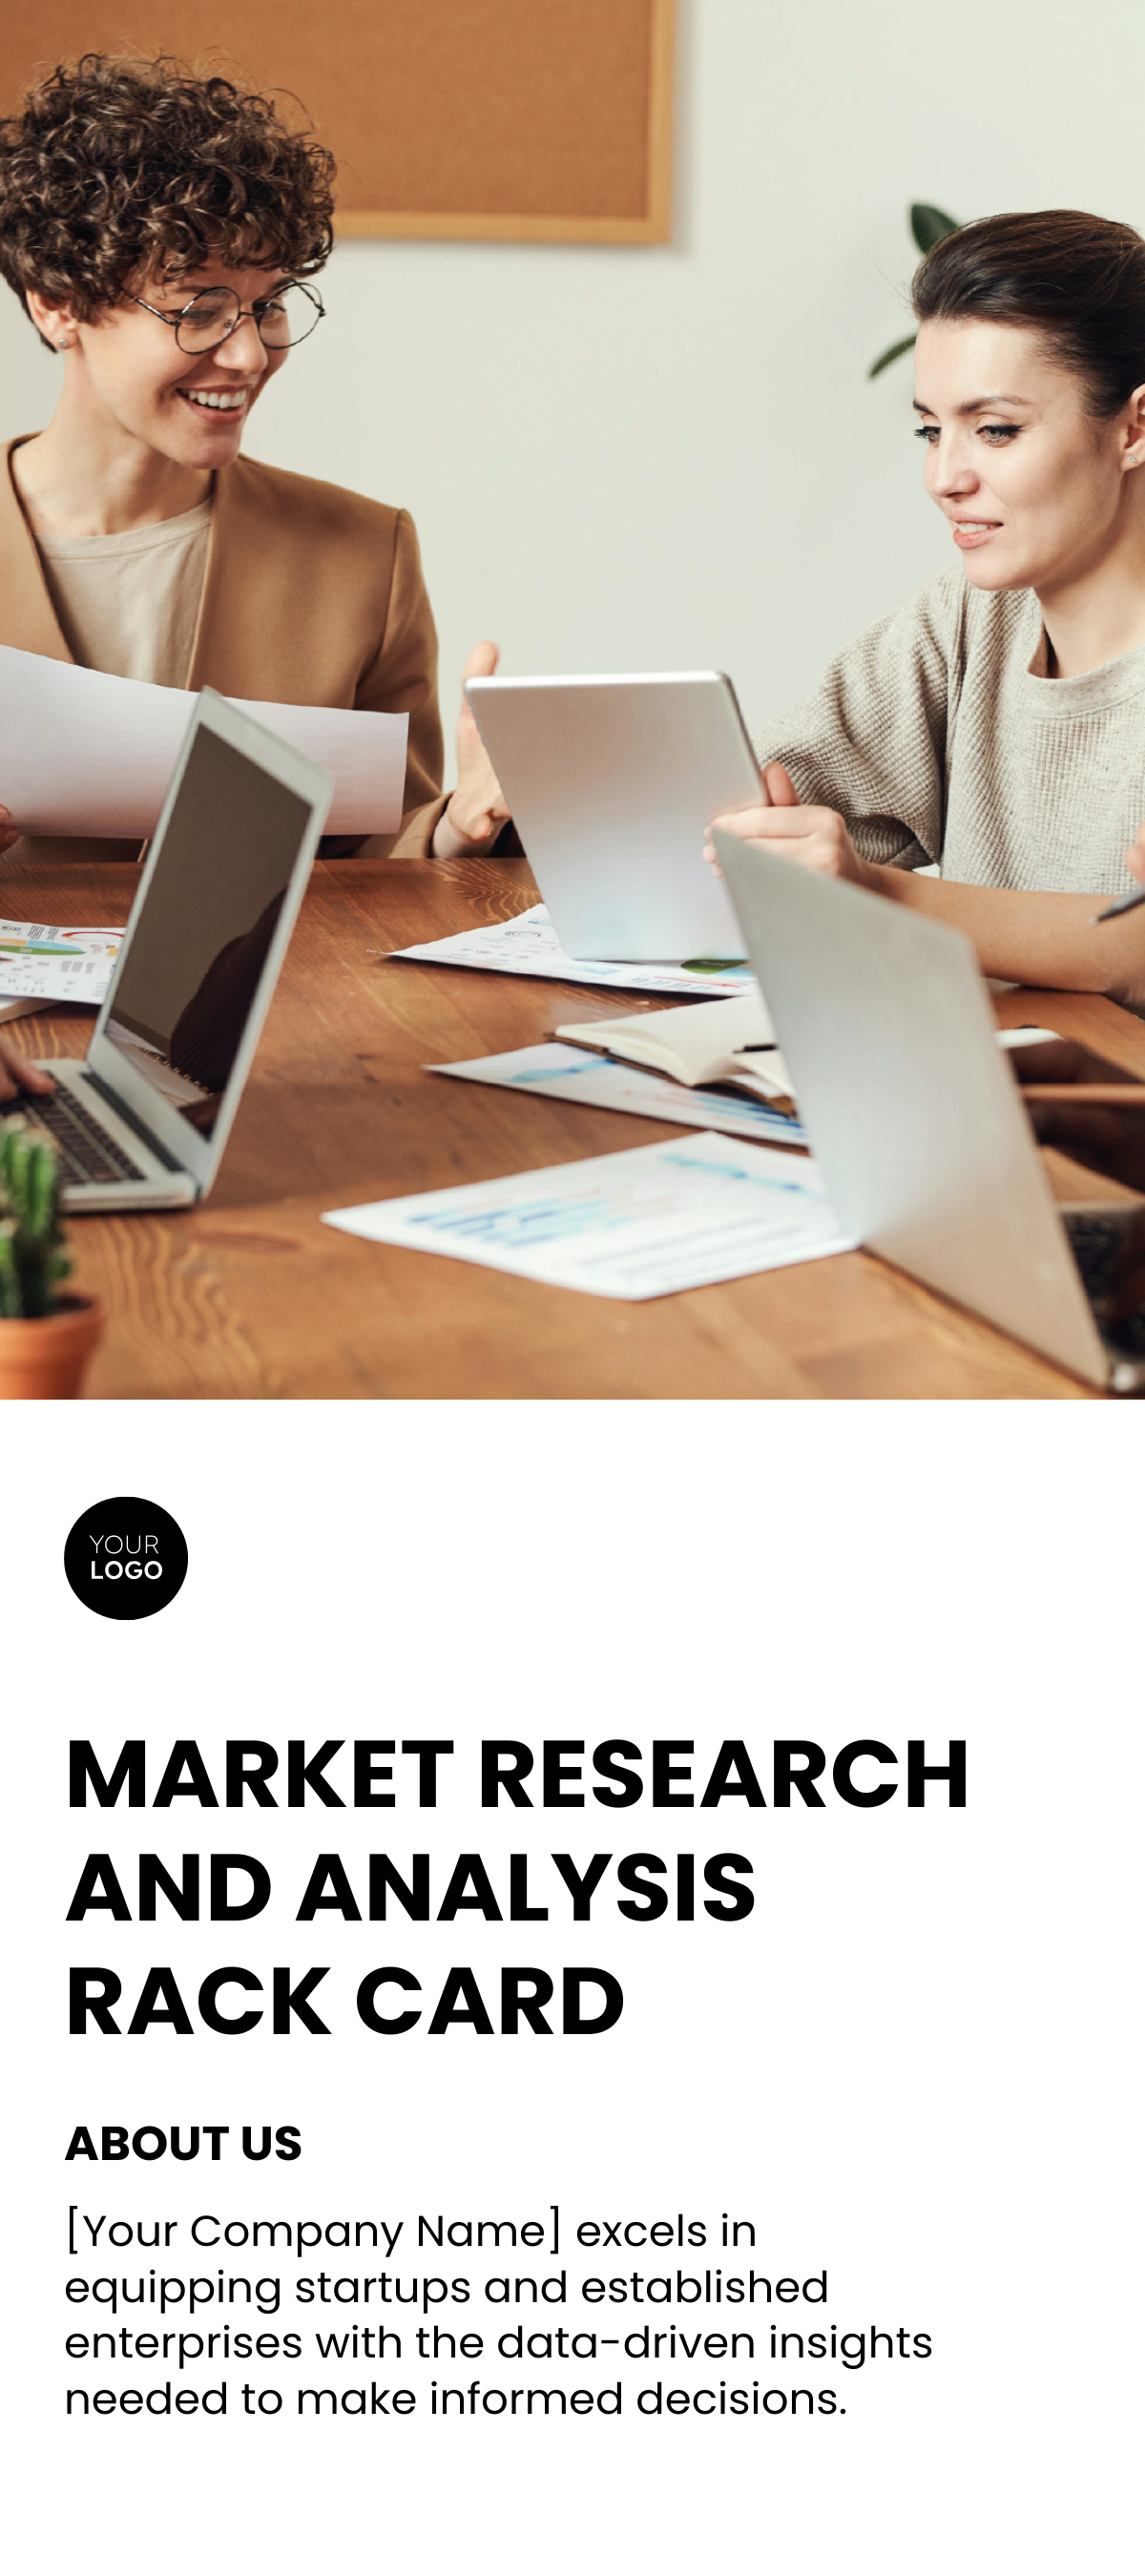 Market Research and Analysis Rack Card Template